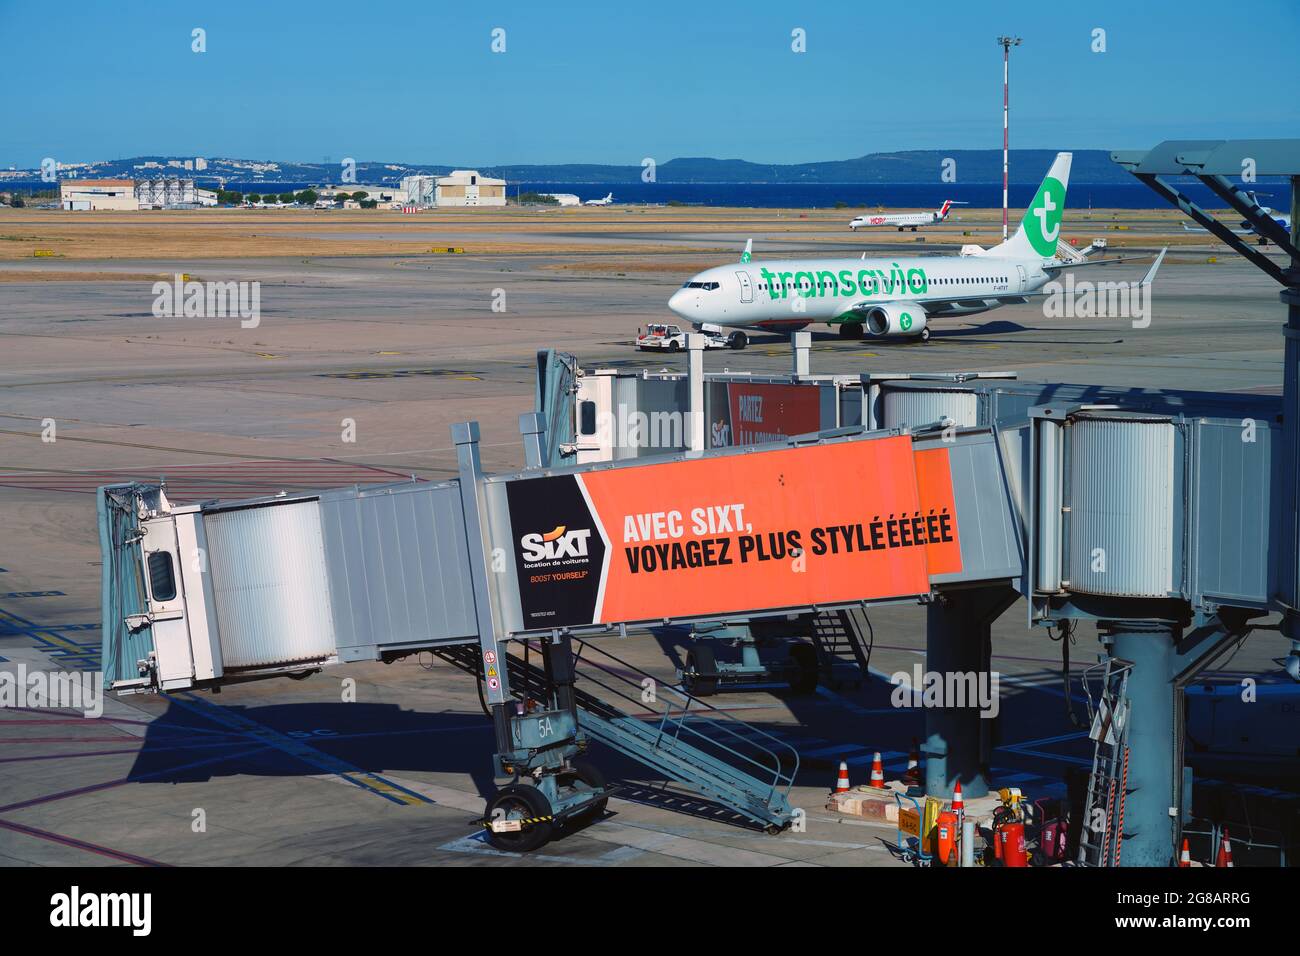 MARSEILLE, FRANCE -29 JUN 2021- View of a Boeing 737-800 airplane from low-cost airline Transavia (HV) at the Marseille Provence Airport (MRS)  in Mar Stock Photo